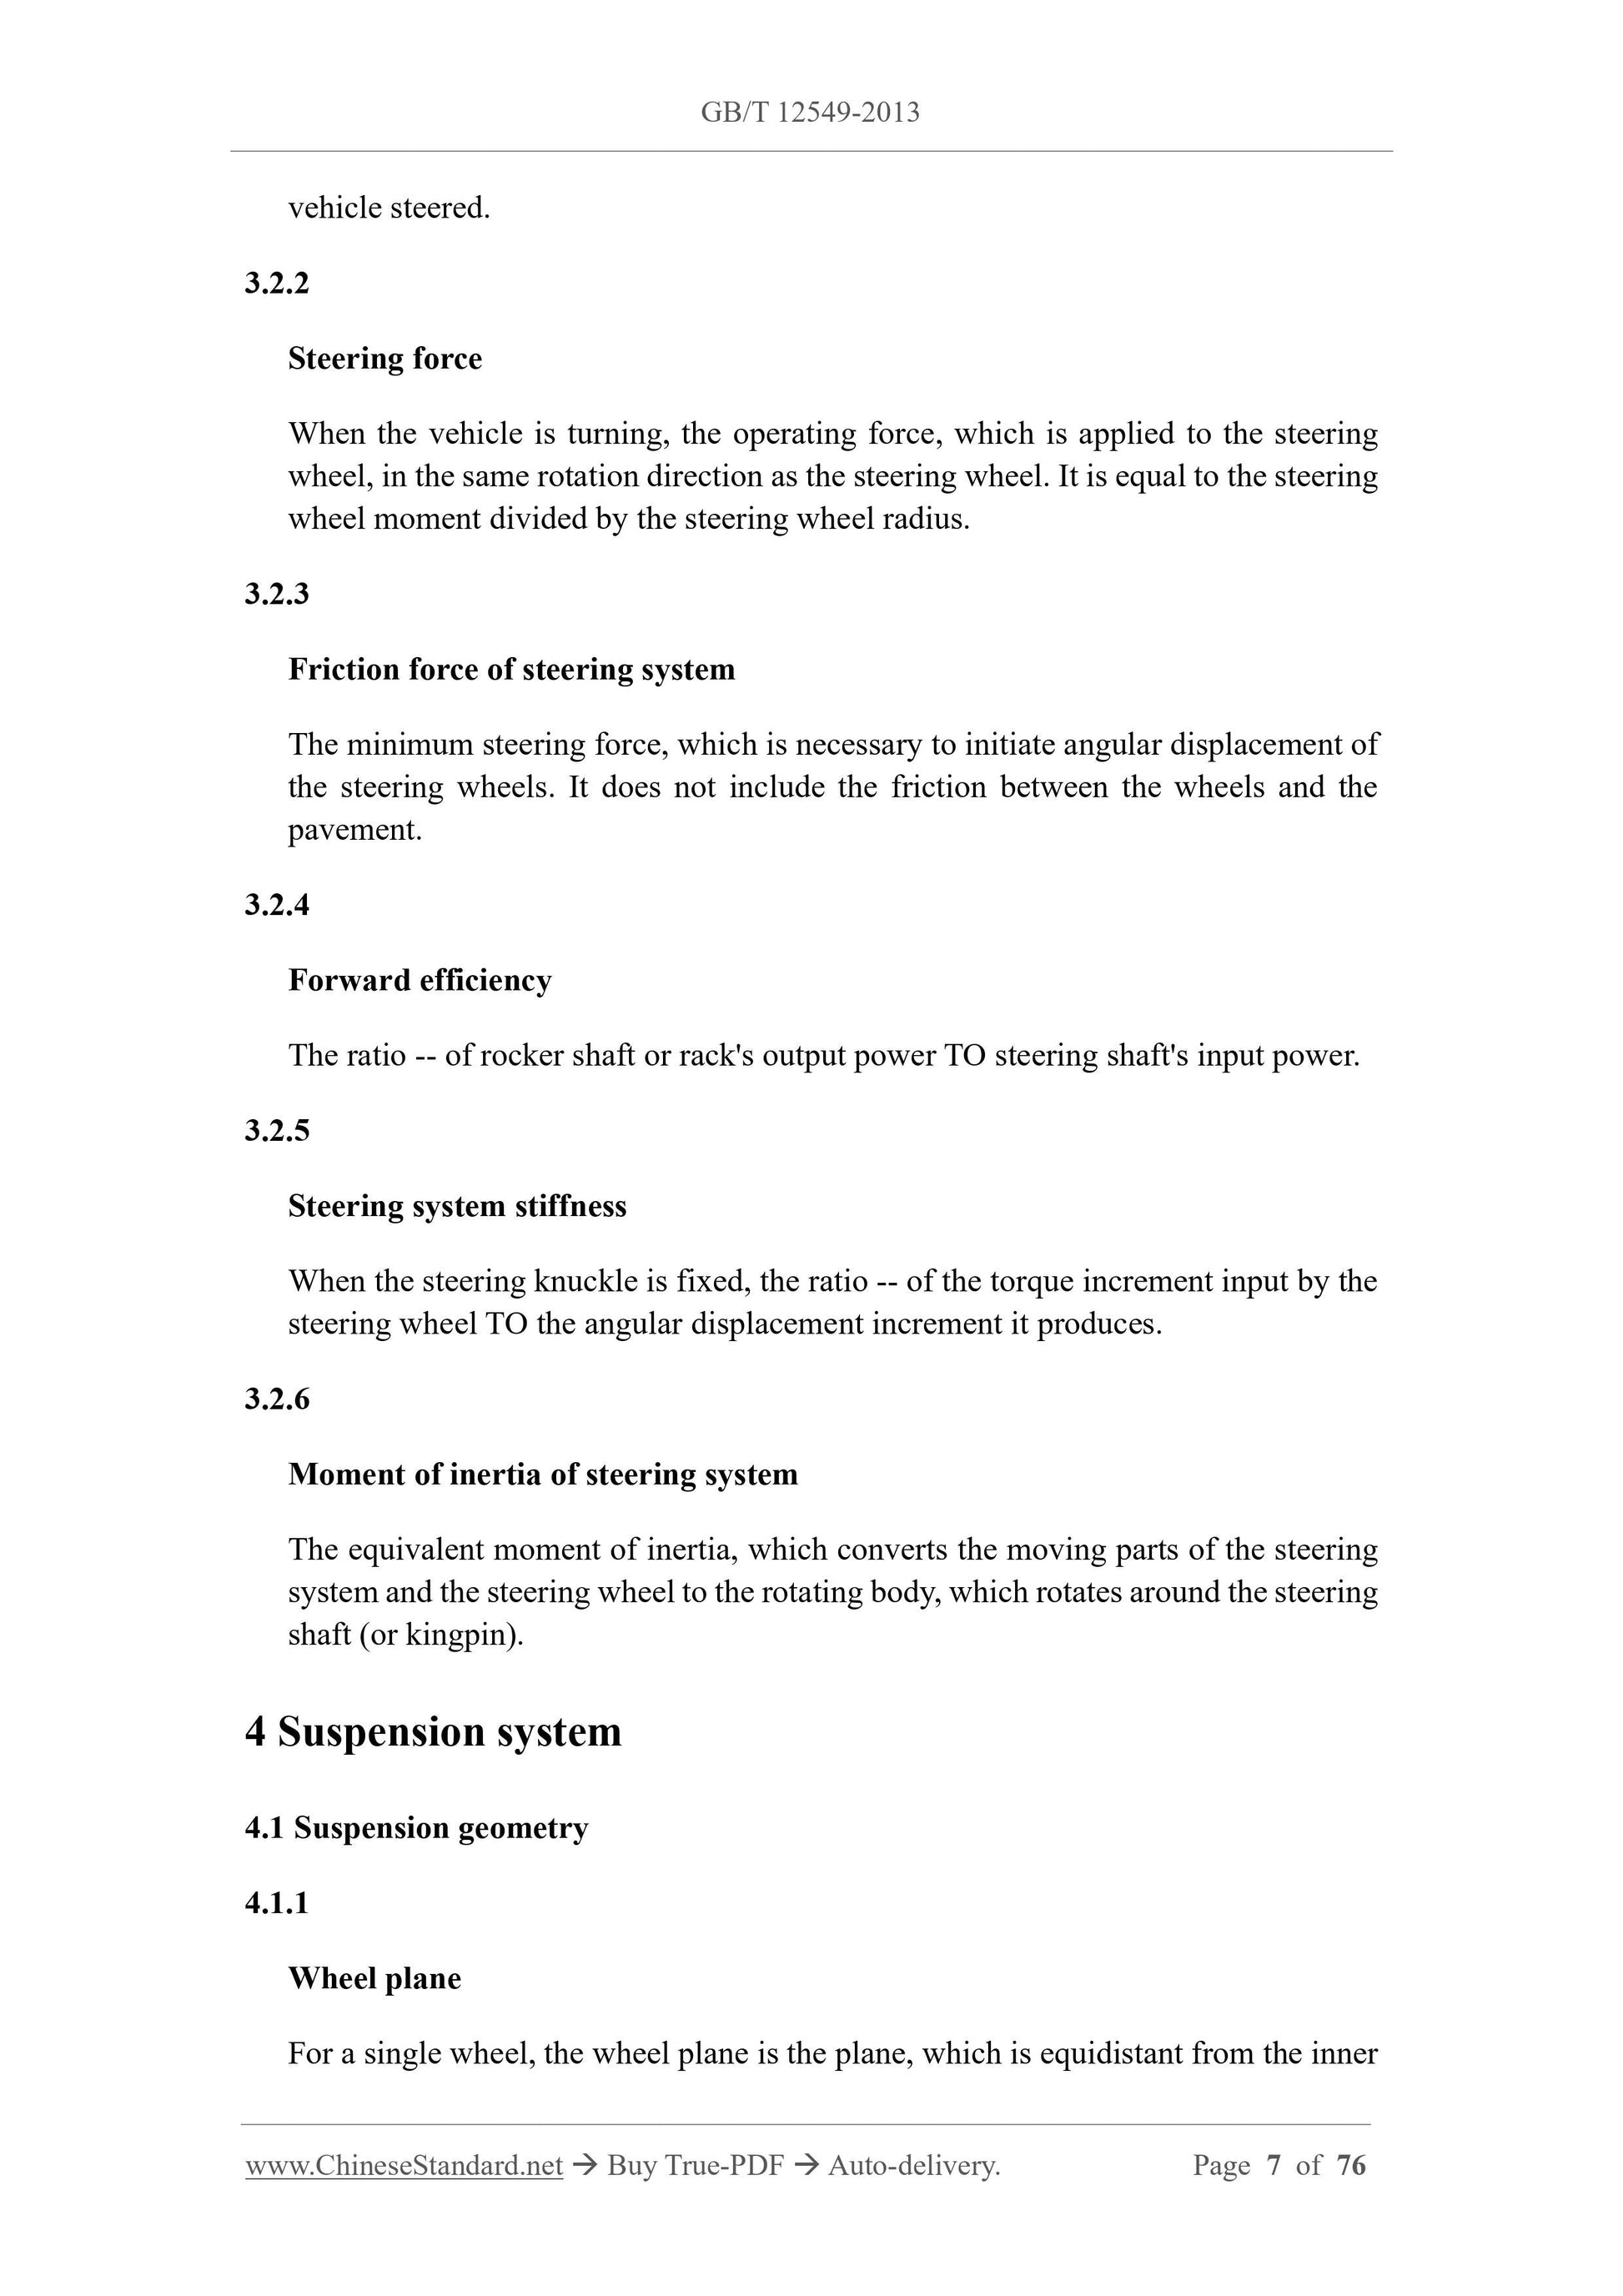 GB/T 12549-2013 Page 5